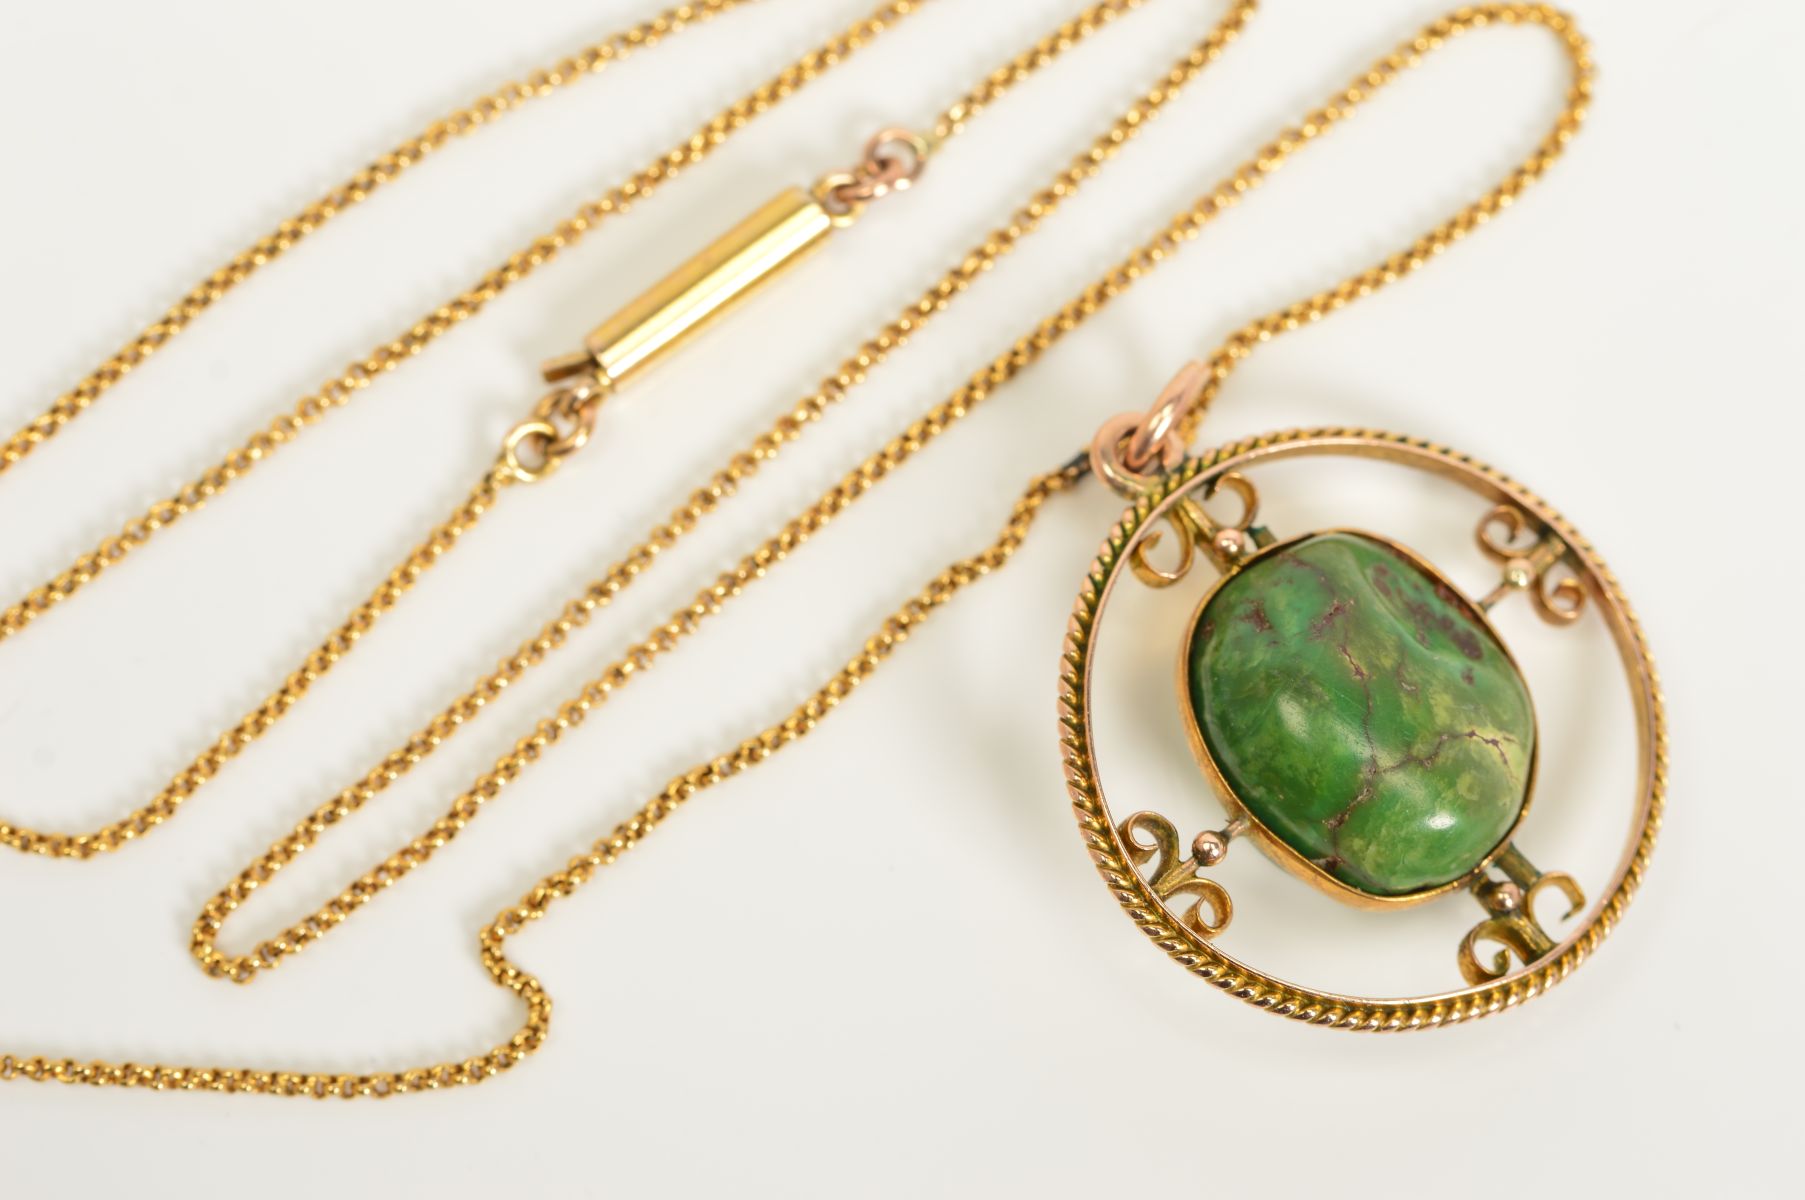 A NECKLACE, designed with a central semi-precious tumble stone within a circular open work